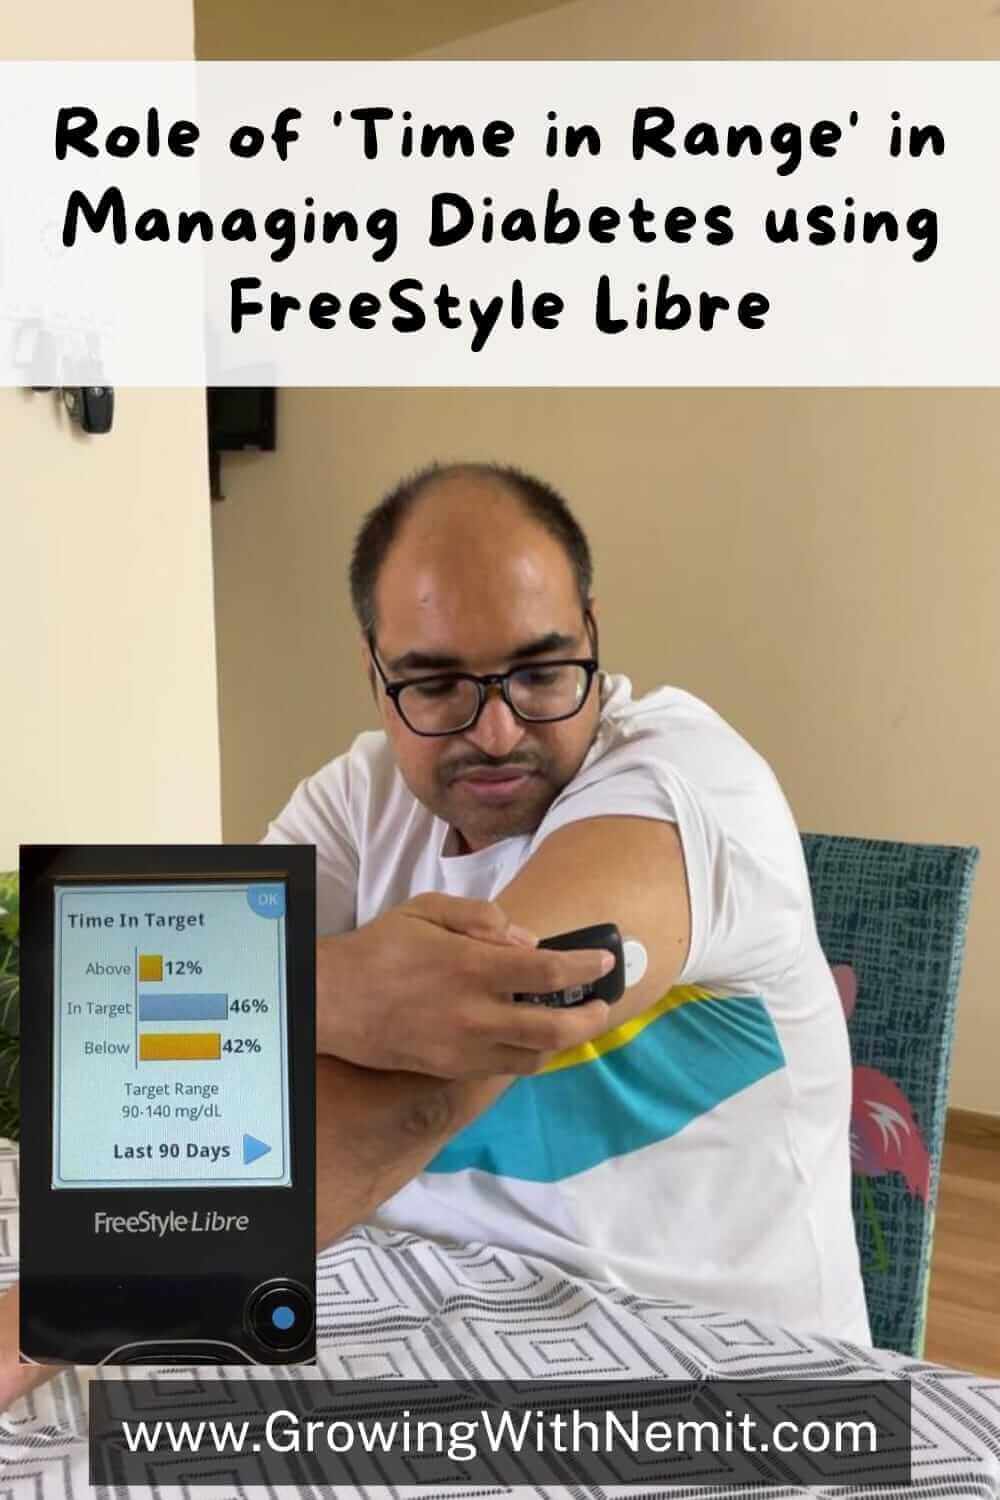 Role of Time in Range in Managing Diabetes using FreeStyle Libre